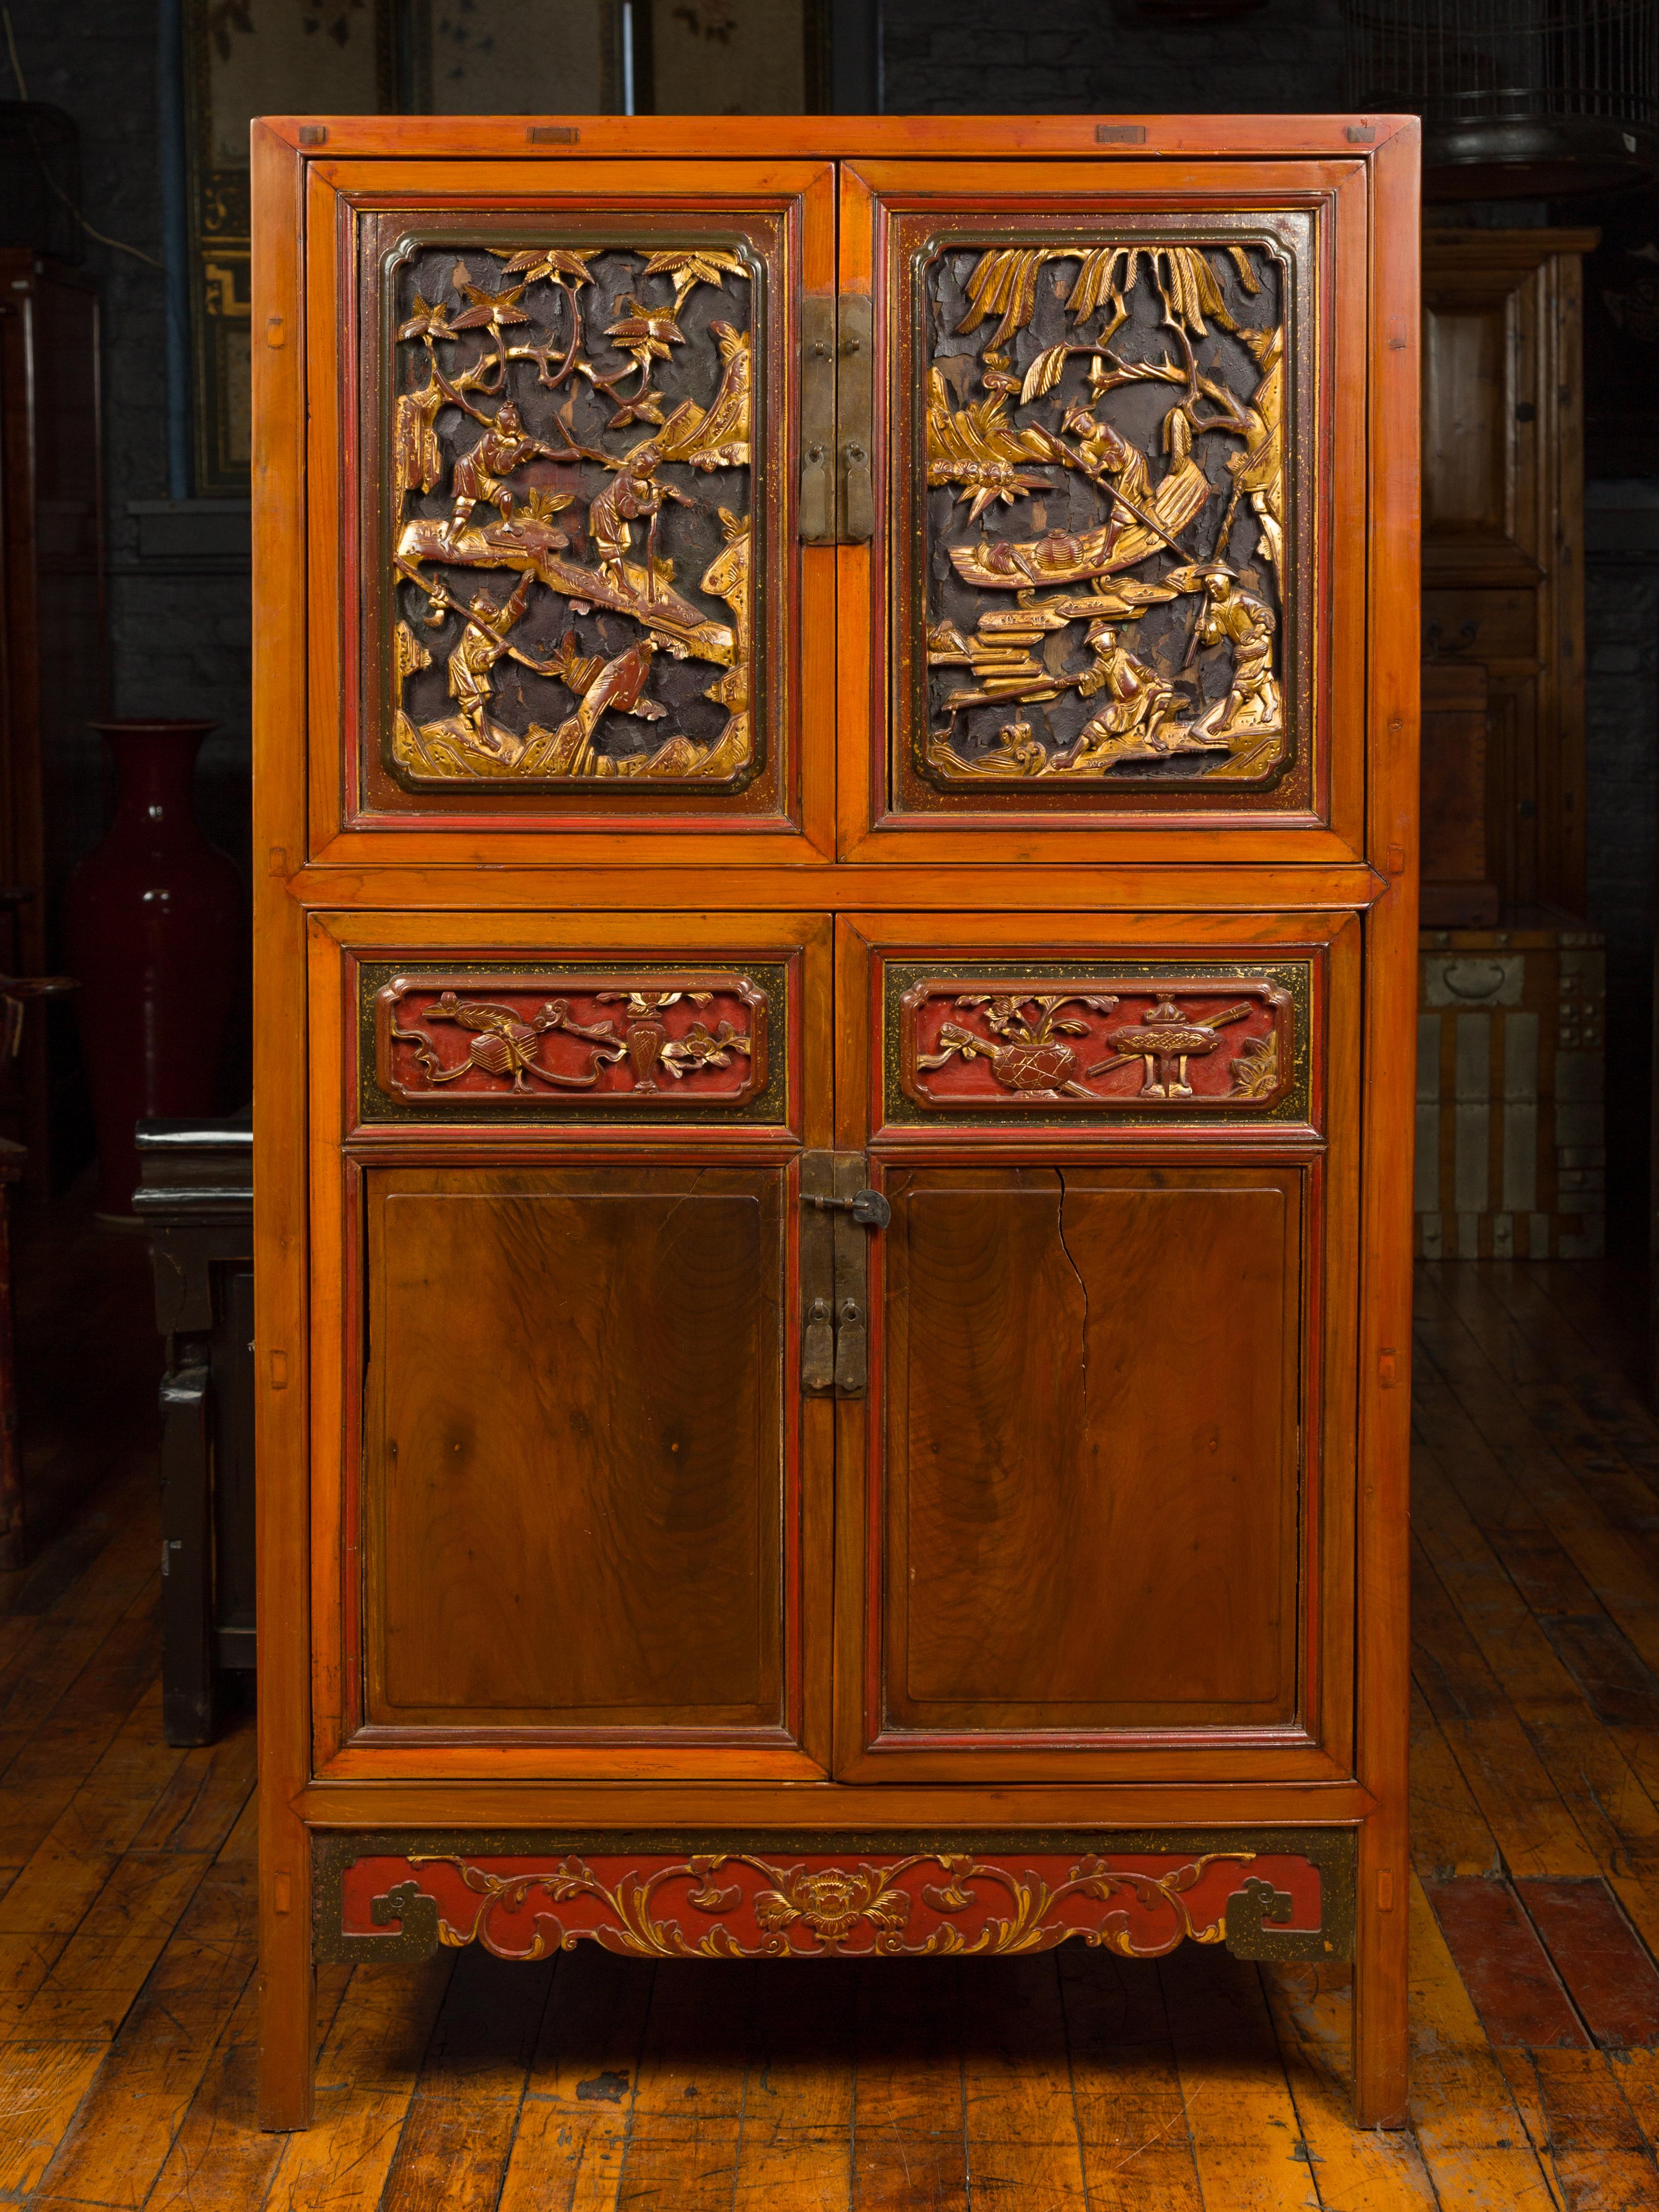 An antique Chinese Ming dynasty style cabinet from the 19th century, with four doors, two drawers, carved giltwood motifs and red accents. Born in China during the 19th century, this wooden cabinet captures our attention with its contrast of colors